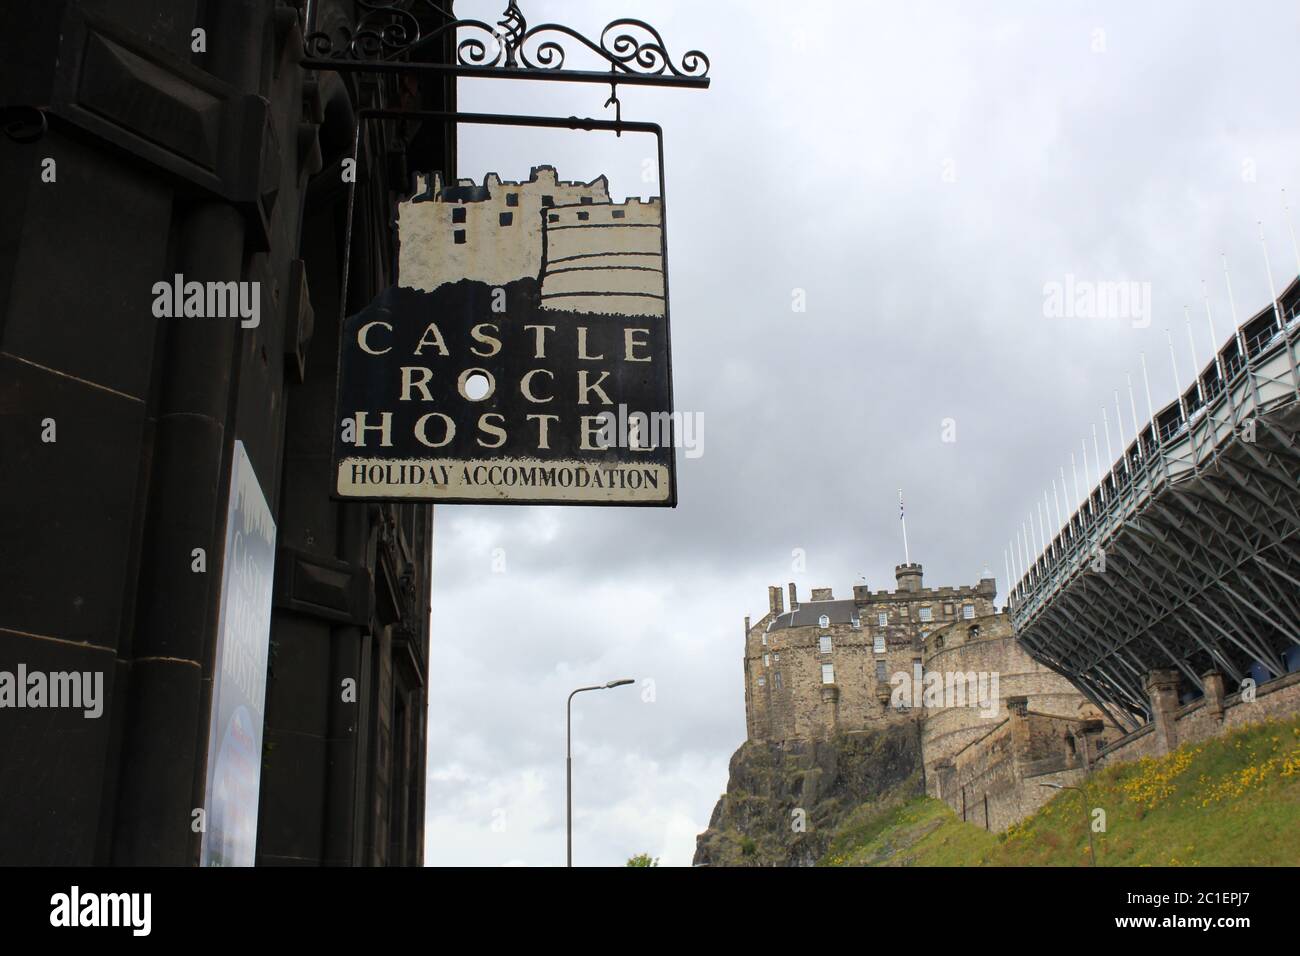 Edinburgh, Scotland - 25 July 2015: Hanging sign of Castle Rock Hostel with Edinburgh Castle in the background on a cloudy day. Stock Photo